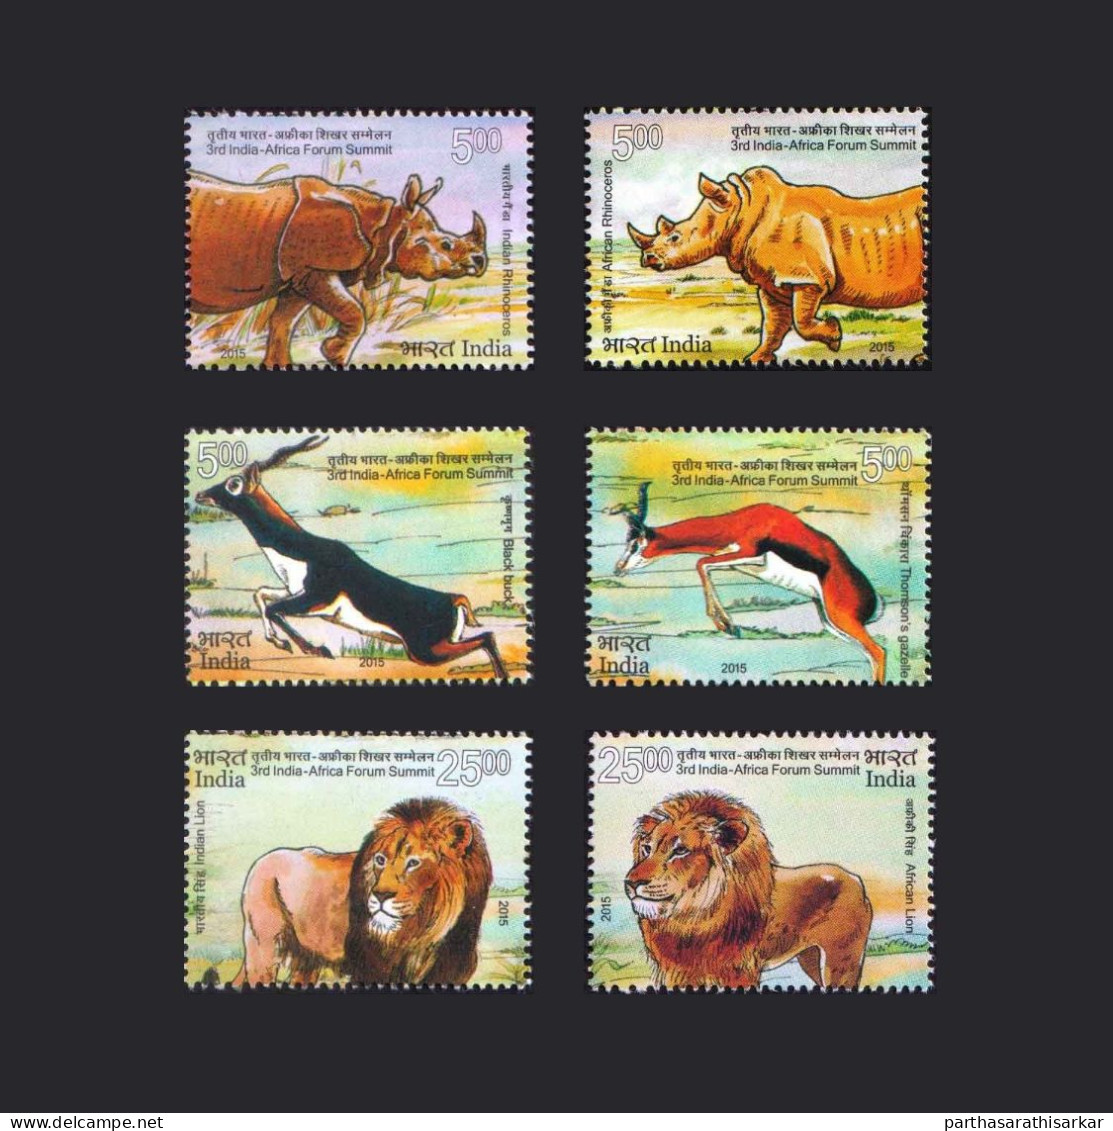 INDIA 2015 3RD INDIA-AFRICA FORUM SUMMIT FAUNA ANIMALS COMPLETE SET OF 6V STAMPS MNH - Unused Stamps